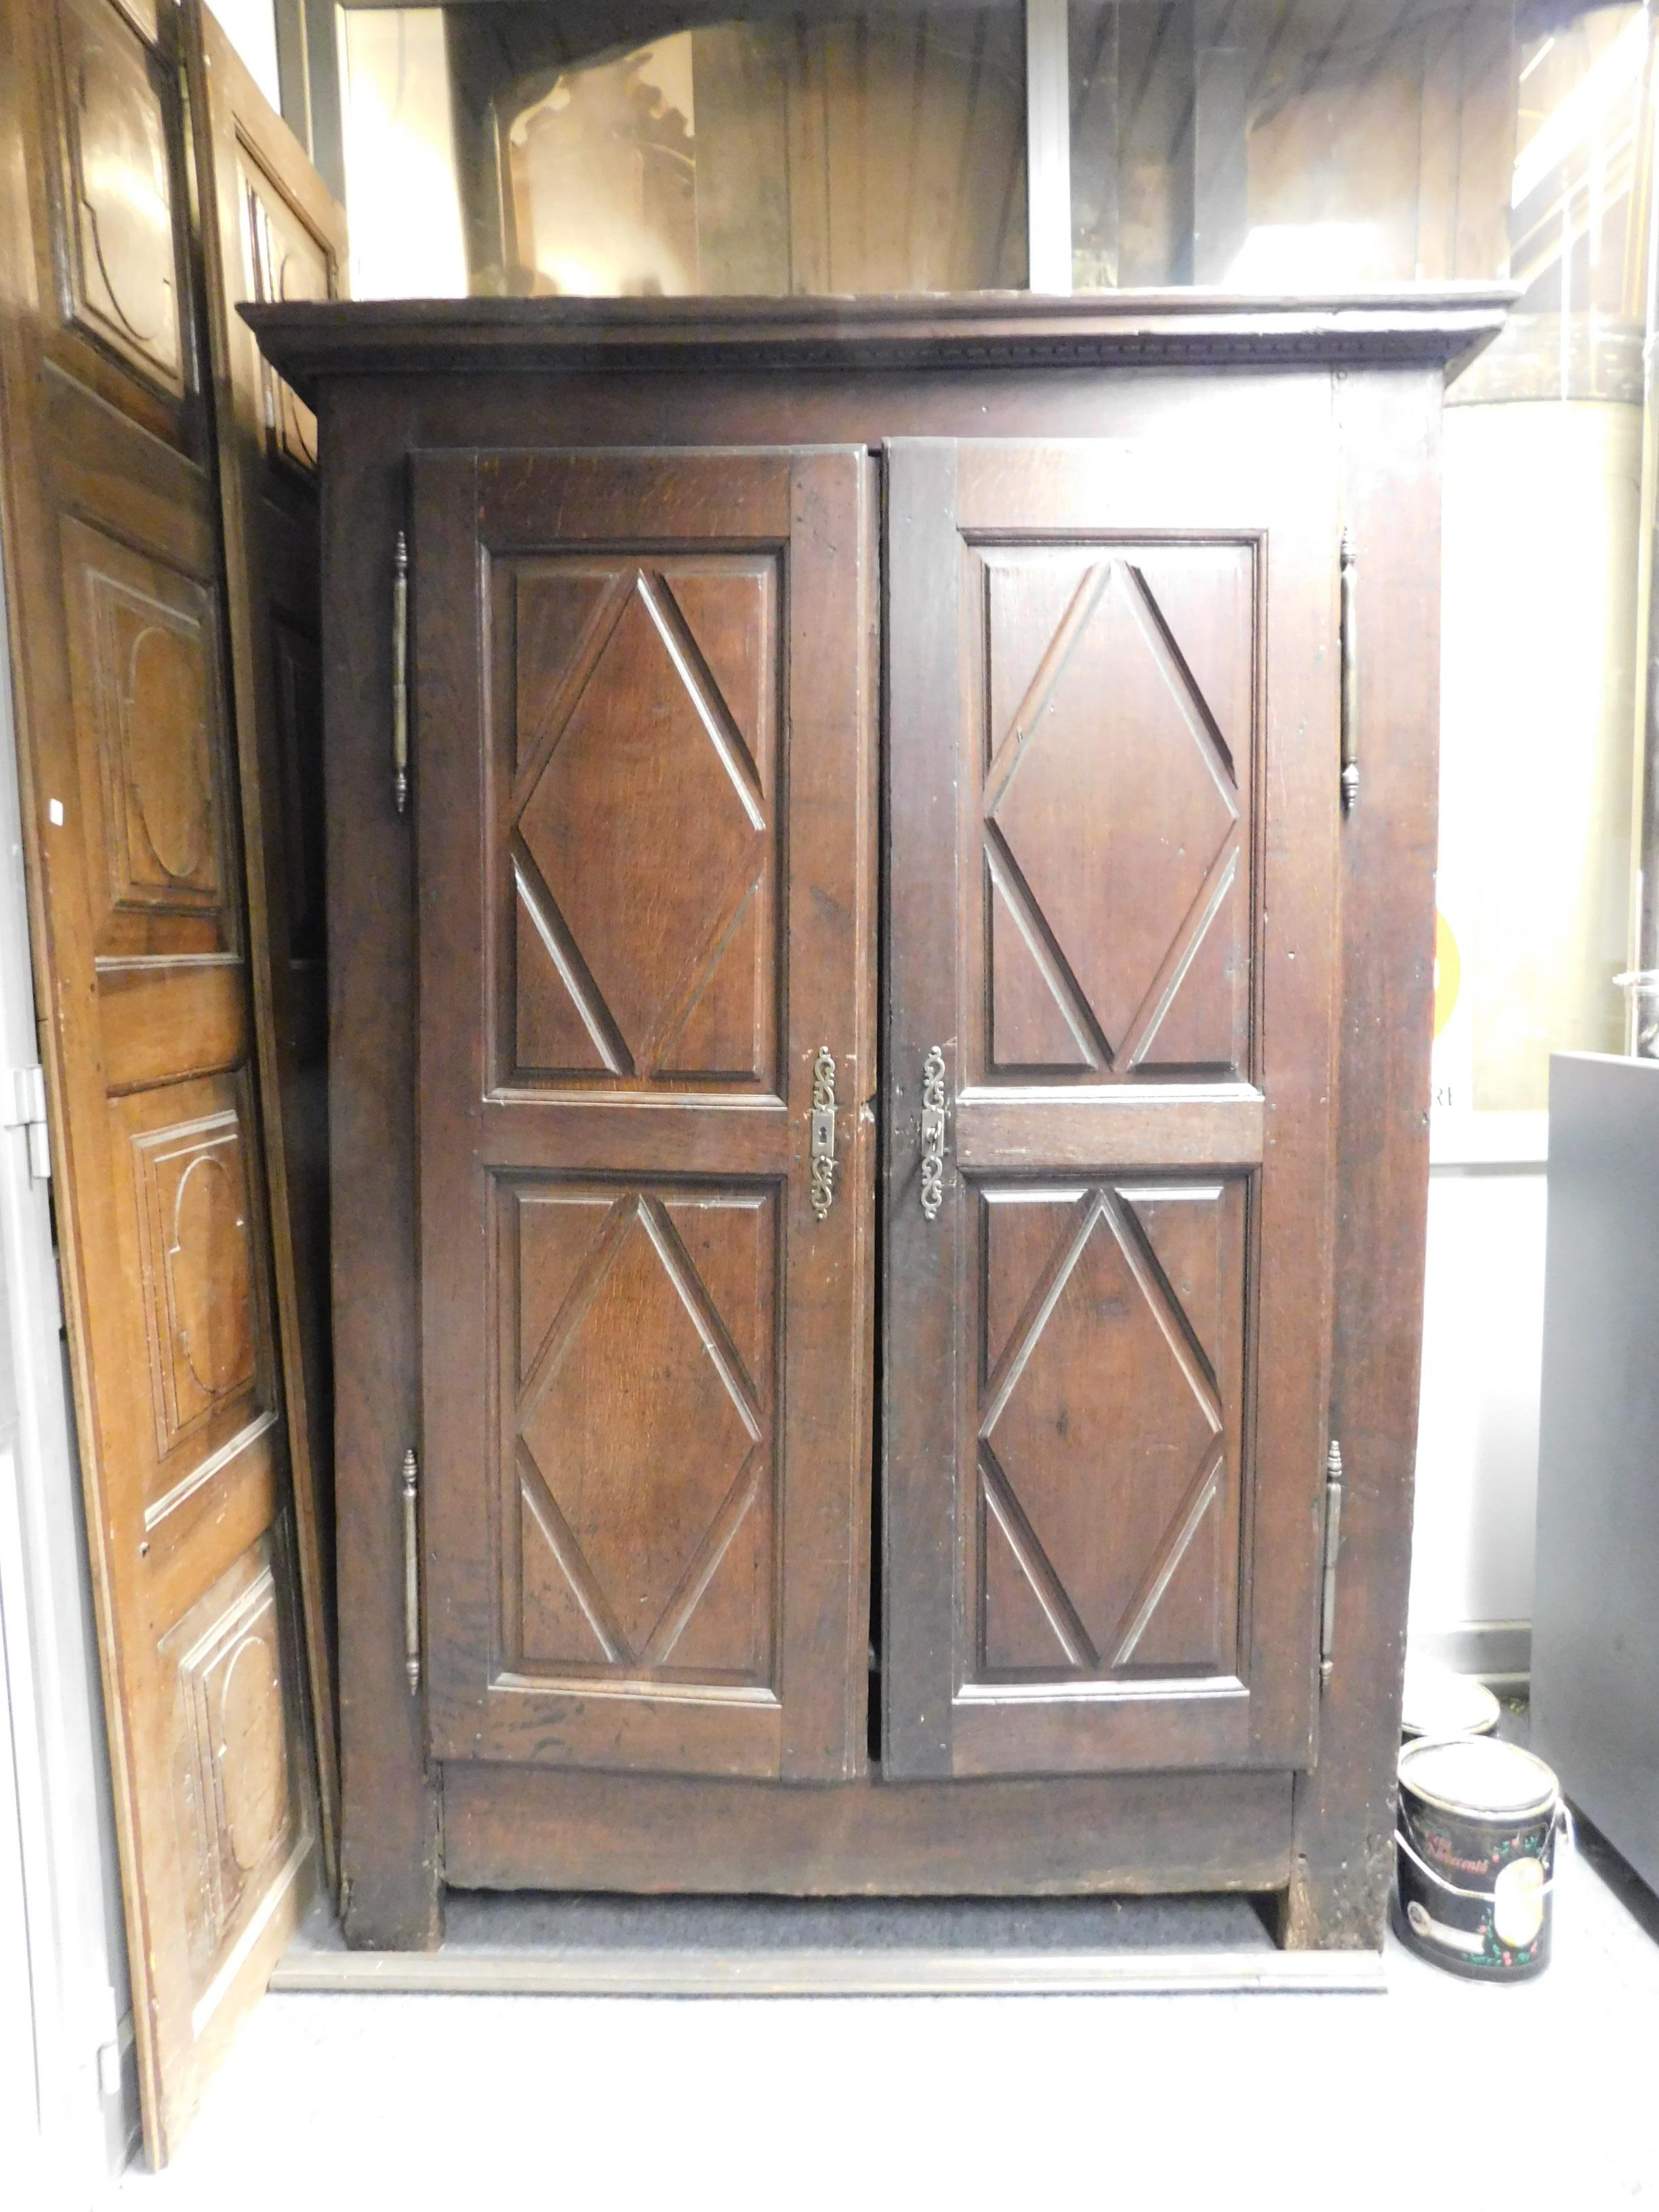 Antique wardrobe in solid oak wood, hand-carved on the sides and in the doors (double door) with lozenge-shaped tiles, built and sculpted in the middle of the 18th century in Italy.
Maximum external measurements cm w 133 x h 204 x d 58.
Brown and